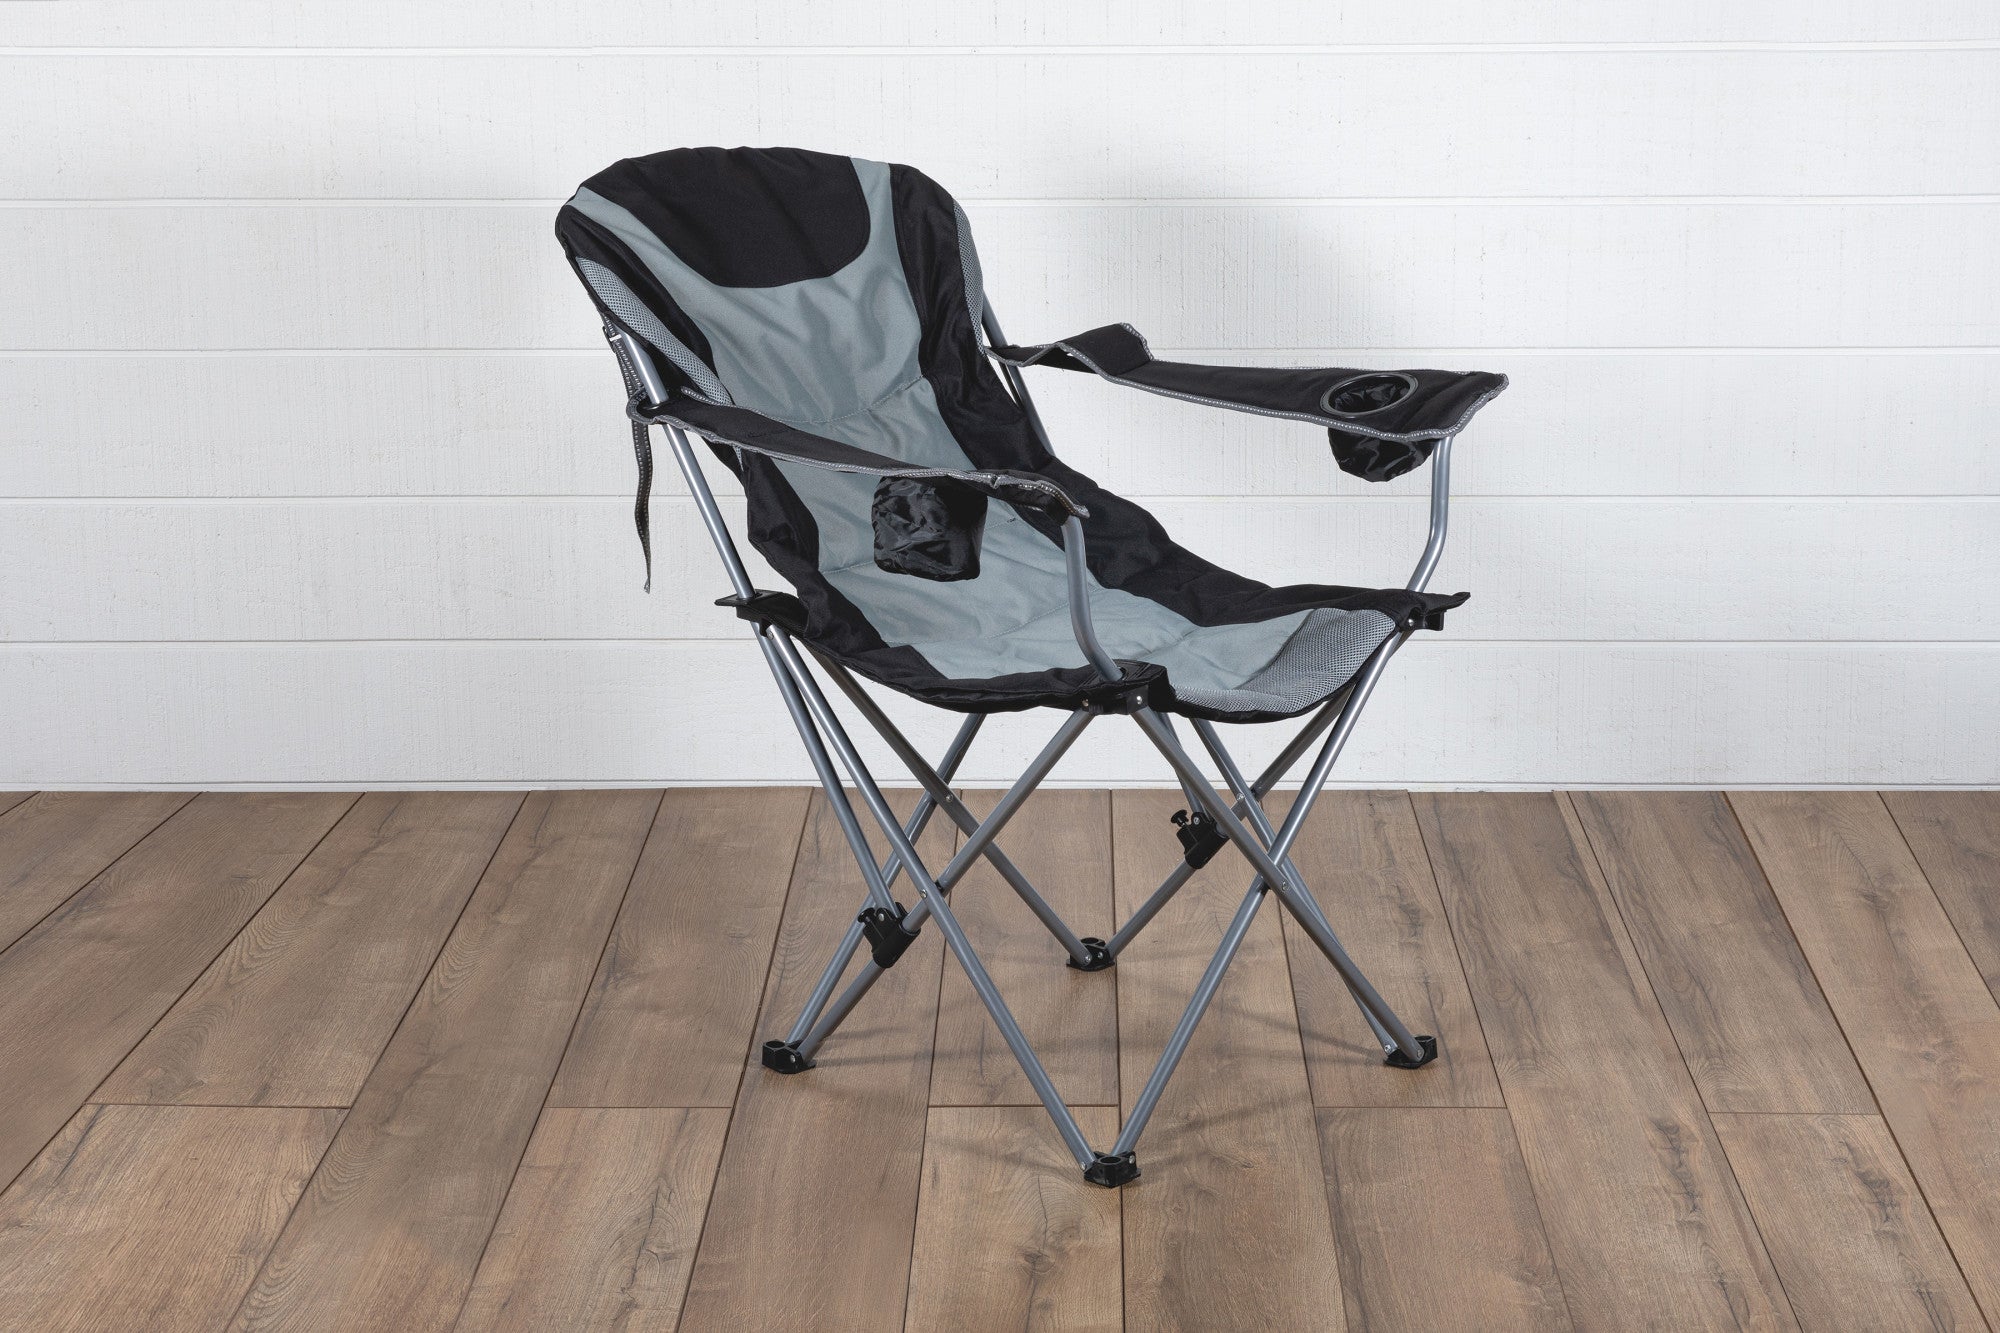 Boston College Eagles - Reclining Camp Chair